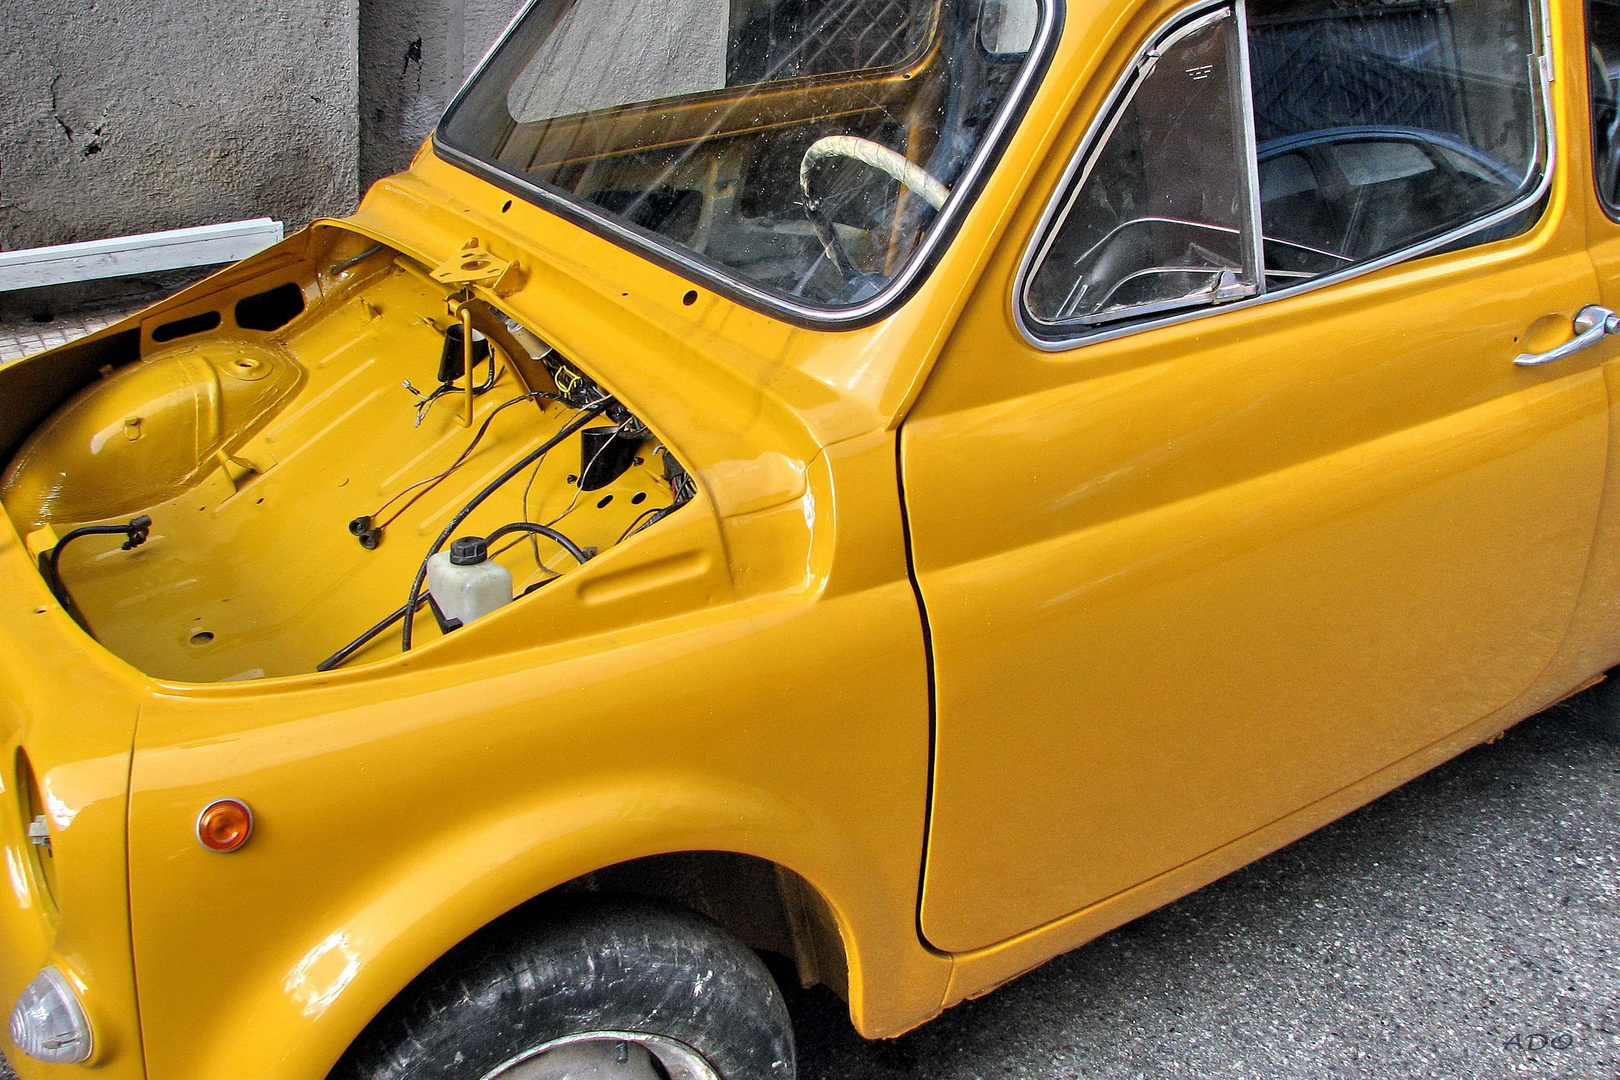 The Little Yellow Fiat